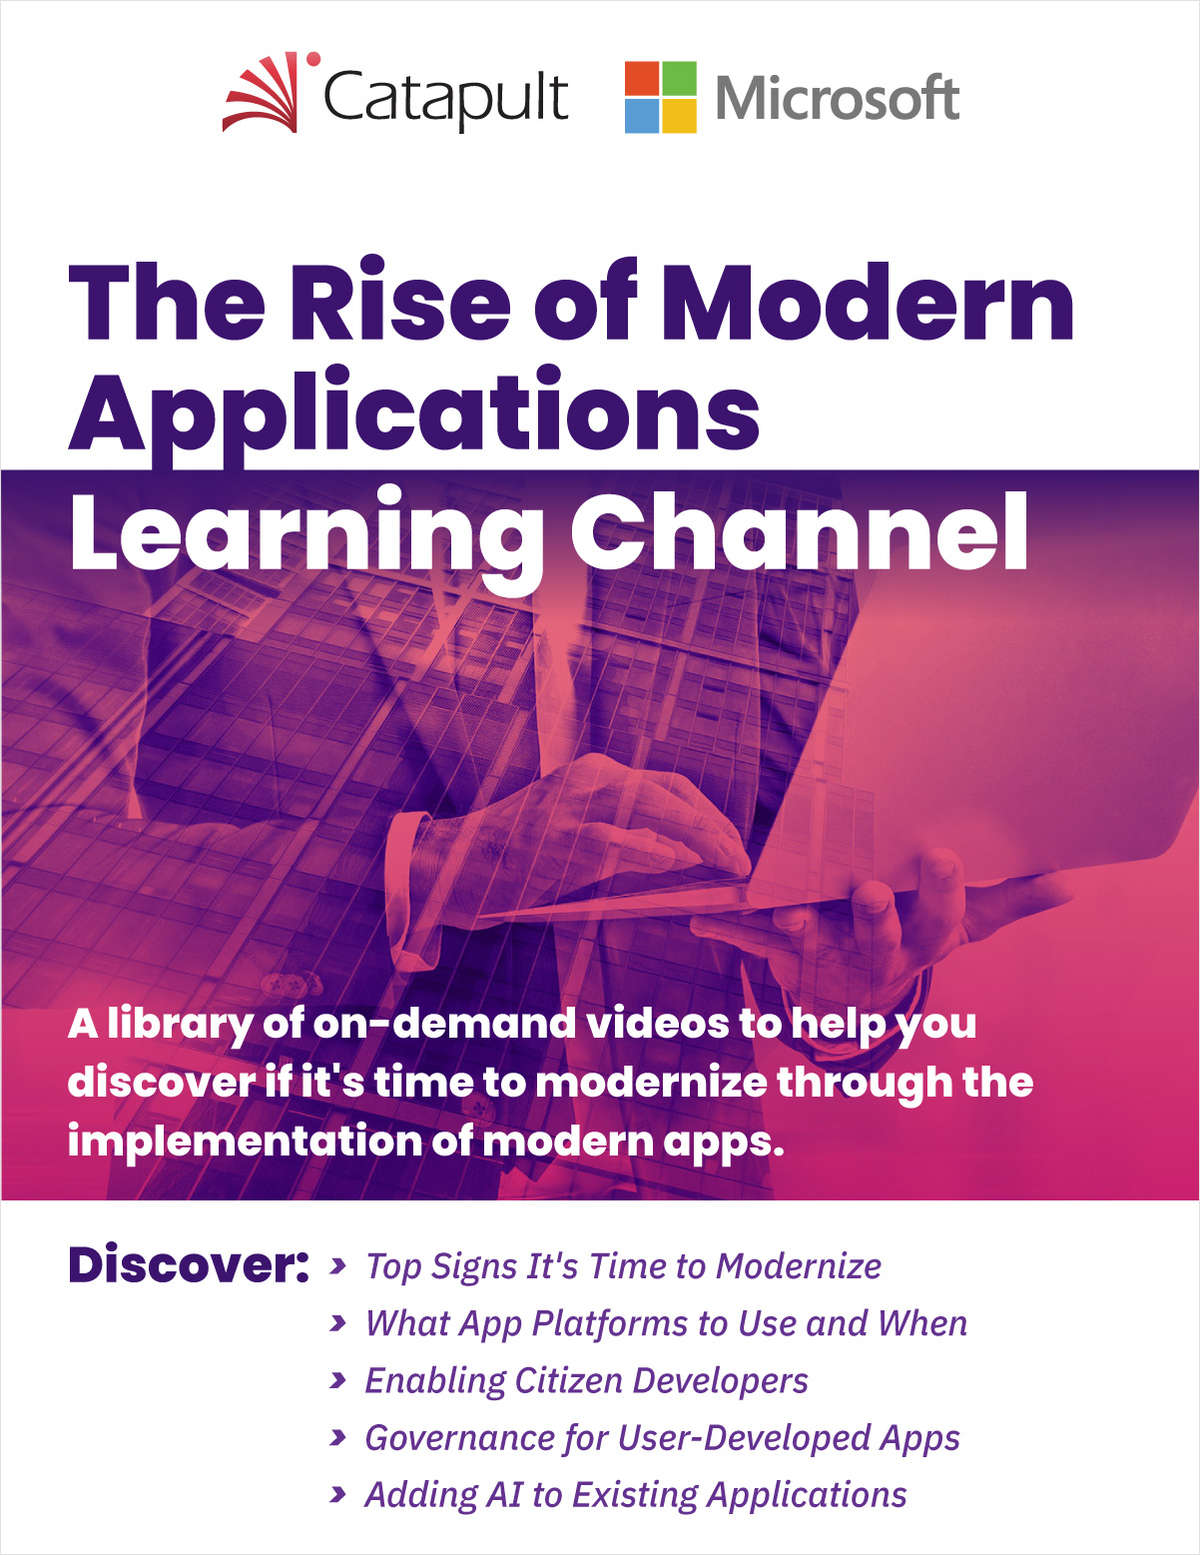 The Rise of Modern Applications [A On-Demand Learning Channel]